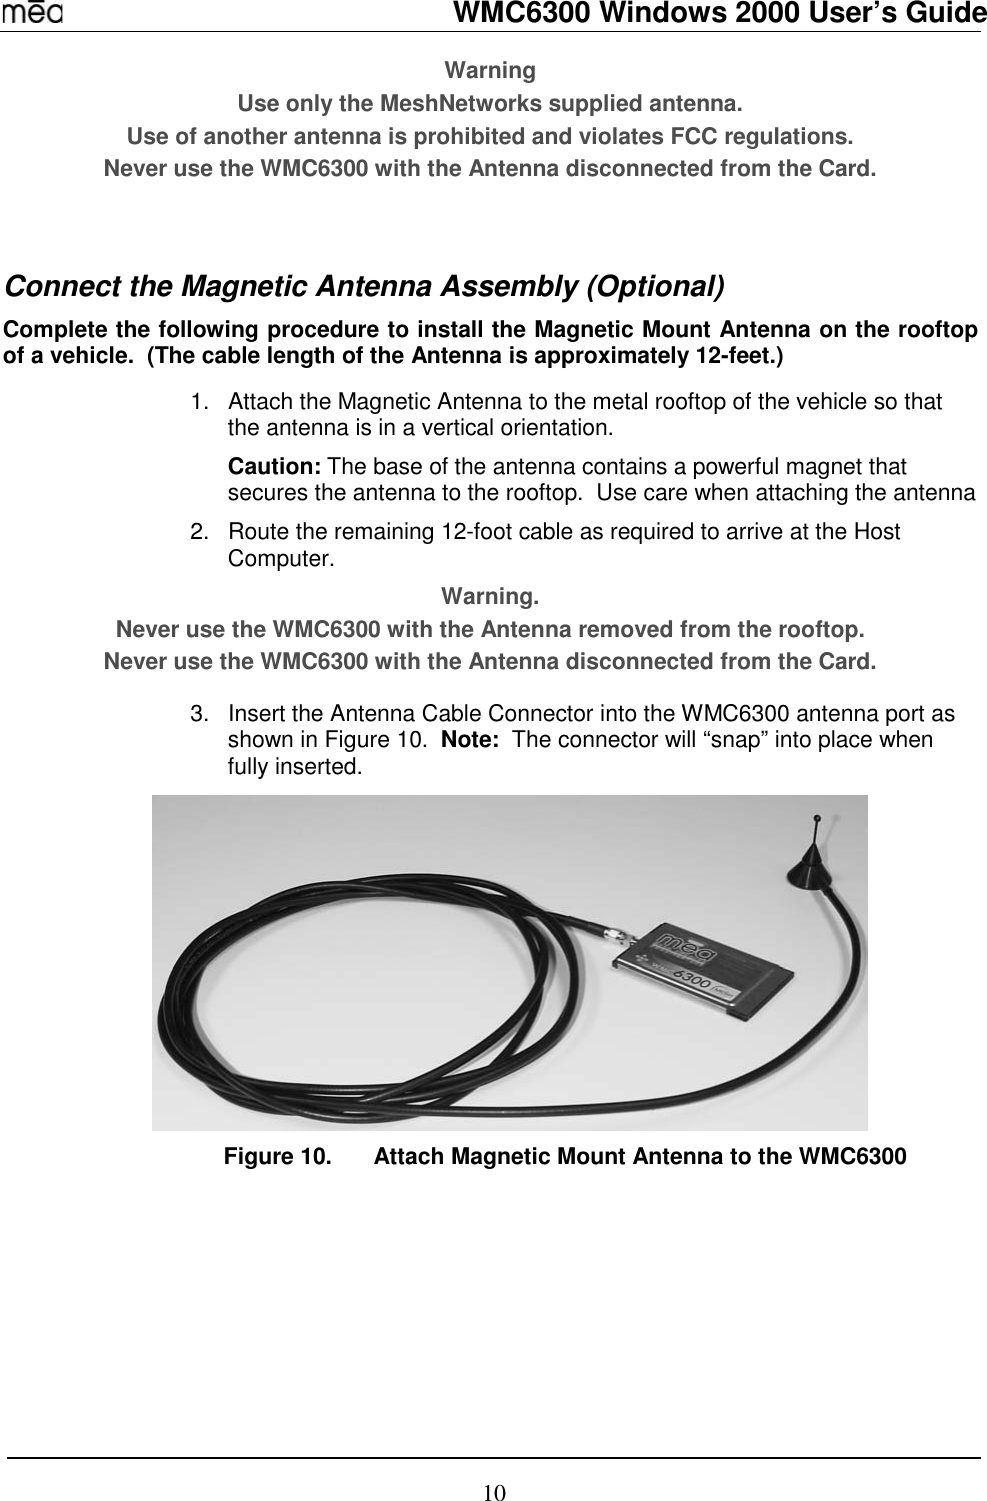   WMC6300 Windows 2000 User’s Guide 10 Warning Use only the MeshNetworks supplied antenna.   Use of another antenna is prohibited and violates FCC regulations. Never use the WMC6300 with the Antenna disconnected from the Card.   Connect the Magnetic Antenna Assembly (Optional) Complete the following procedure to install the Magnetic Mount Antenna on the rooftop of a vehicle.  (The cable length of the Antenna is approximately 12-feet.)  1.  Attach the Magnetic Antenna to the metal rooftop of the vehicle so that the antenna is in a vertical orientation.   Caution: The base of the antenna contains a powerful magnet that secures the antenna to the rooftop.  Use care when attaching the antenna 2.  Route the remaining 12-foot cable as required to arrive at the Host Computer. Warning.   Never use the WMC6300 with the Antenna removed from the rooftop. Never use the WMC6300 with the Antenna disconnected from the Card.  3.  Insert the Antenna Cable Connector into the WMC6300 antenna port as shown in Figure 10.  Note:  The connector will “snap” into place when fully inserted.  Figure 10.  Attach Magnetic Mount Antenna to the WMC6300  